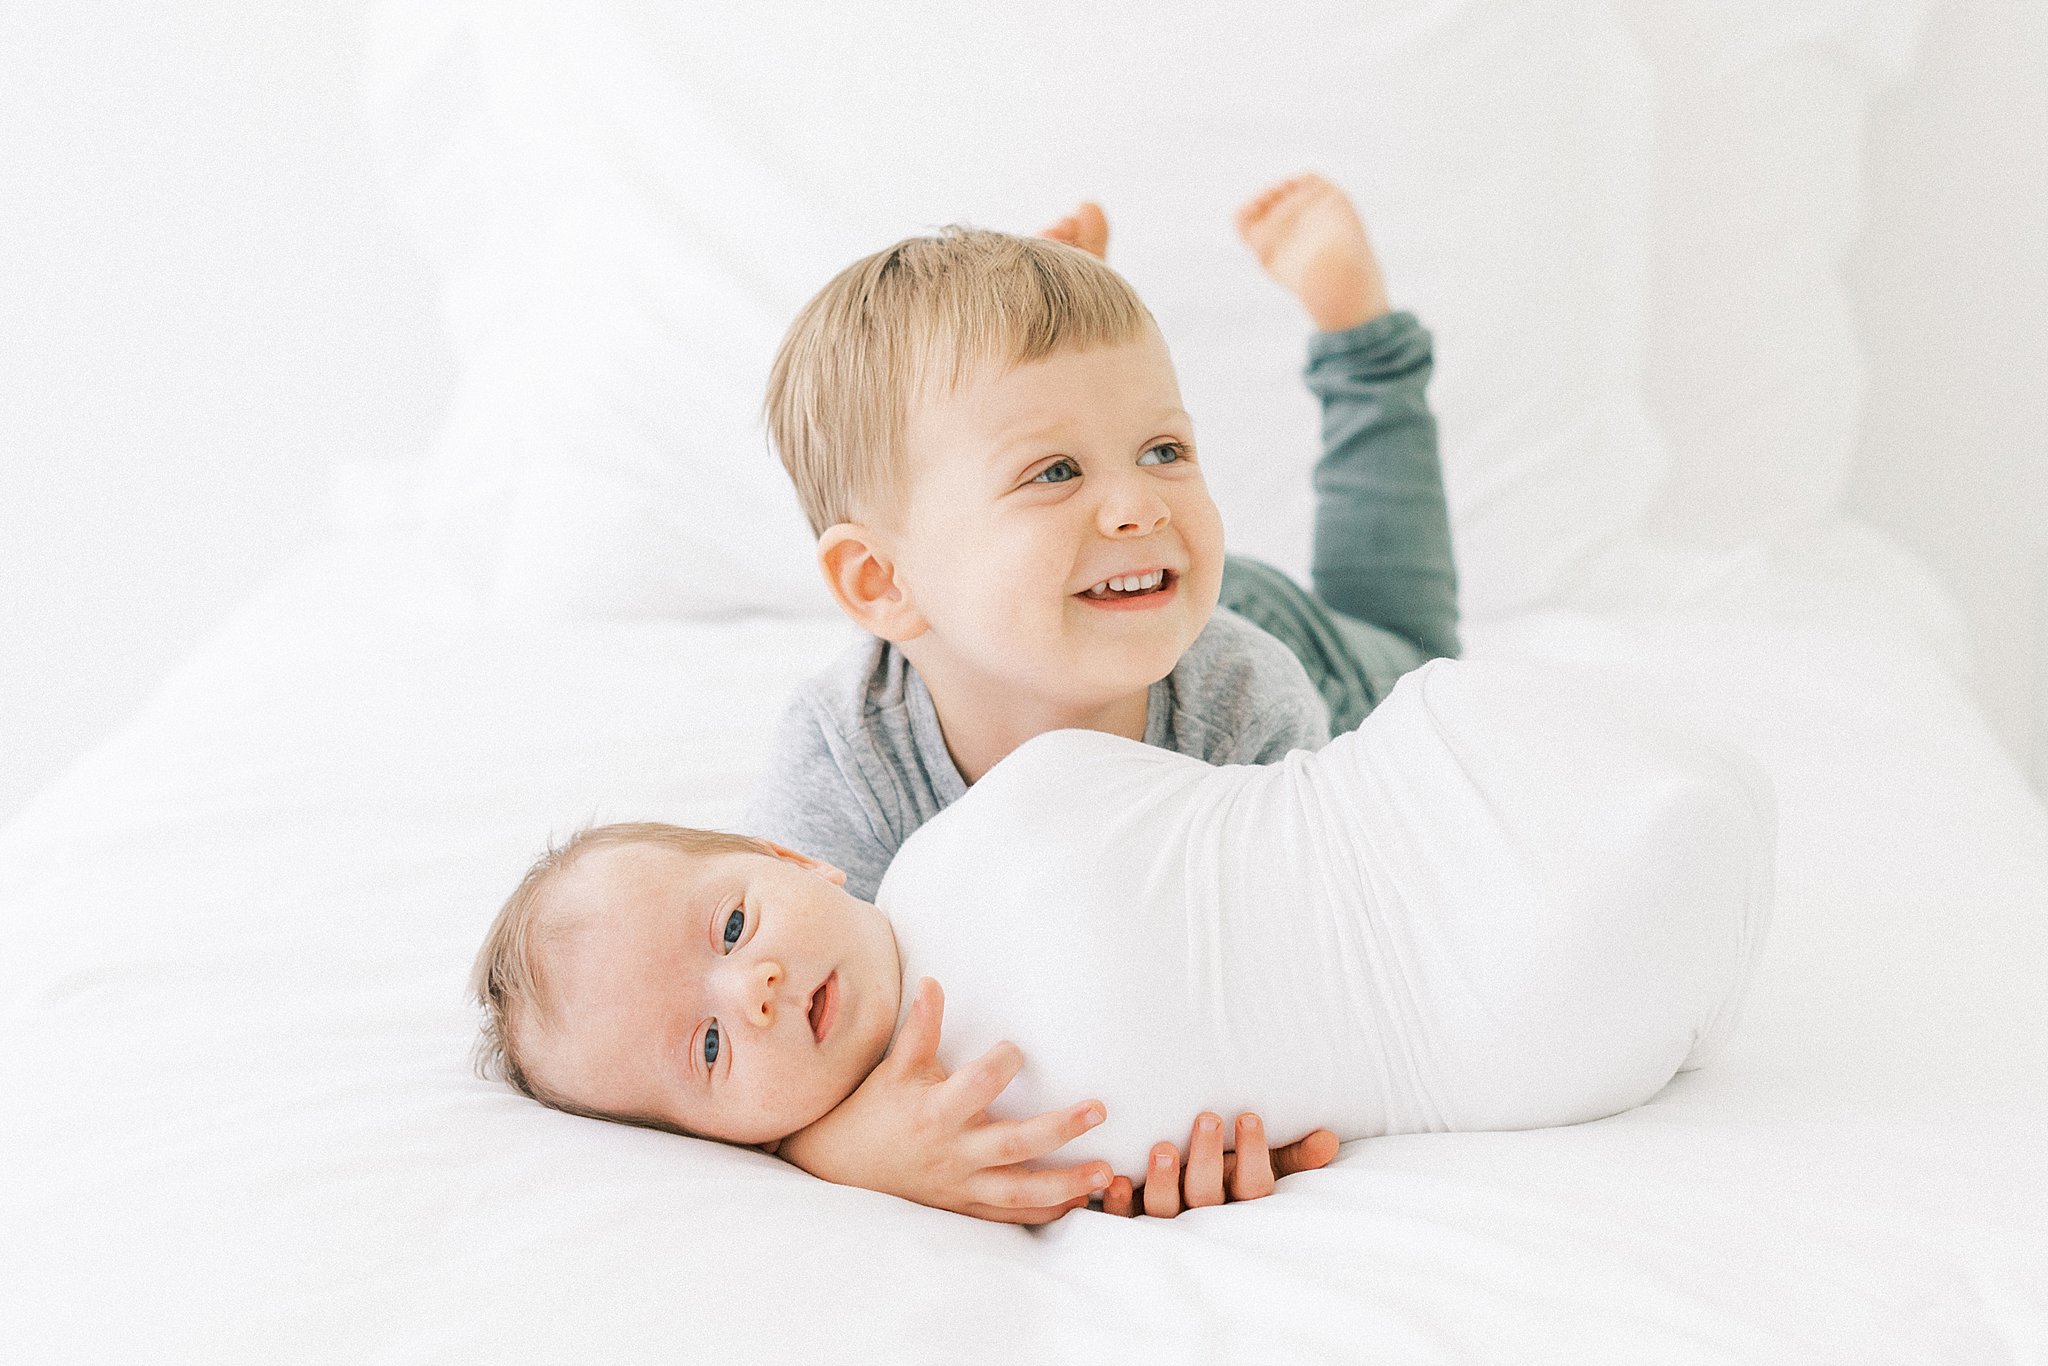 A young boy lays on a bed playing with his newborn baby sibling